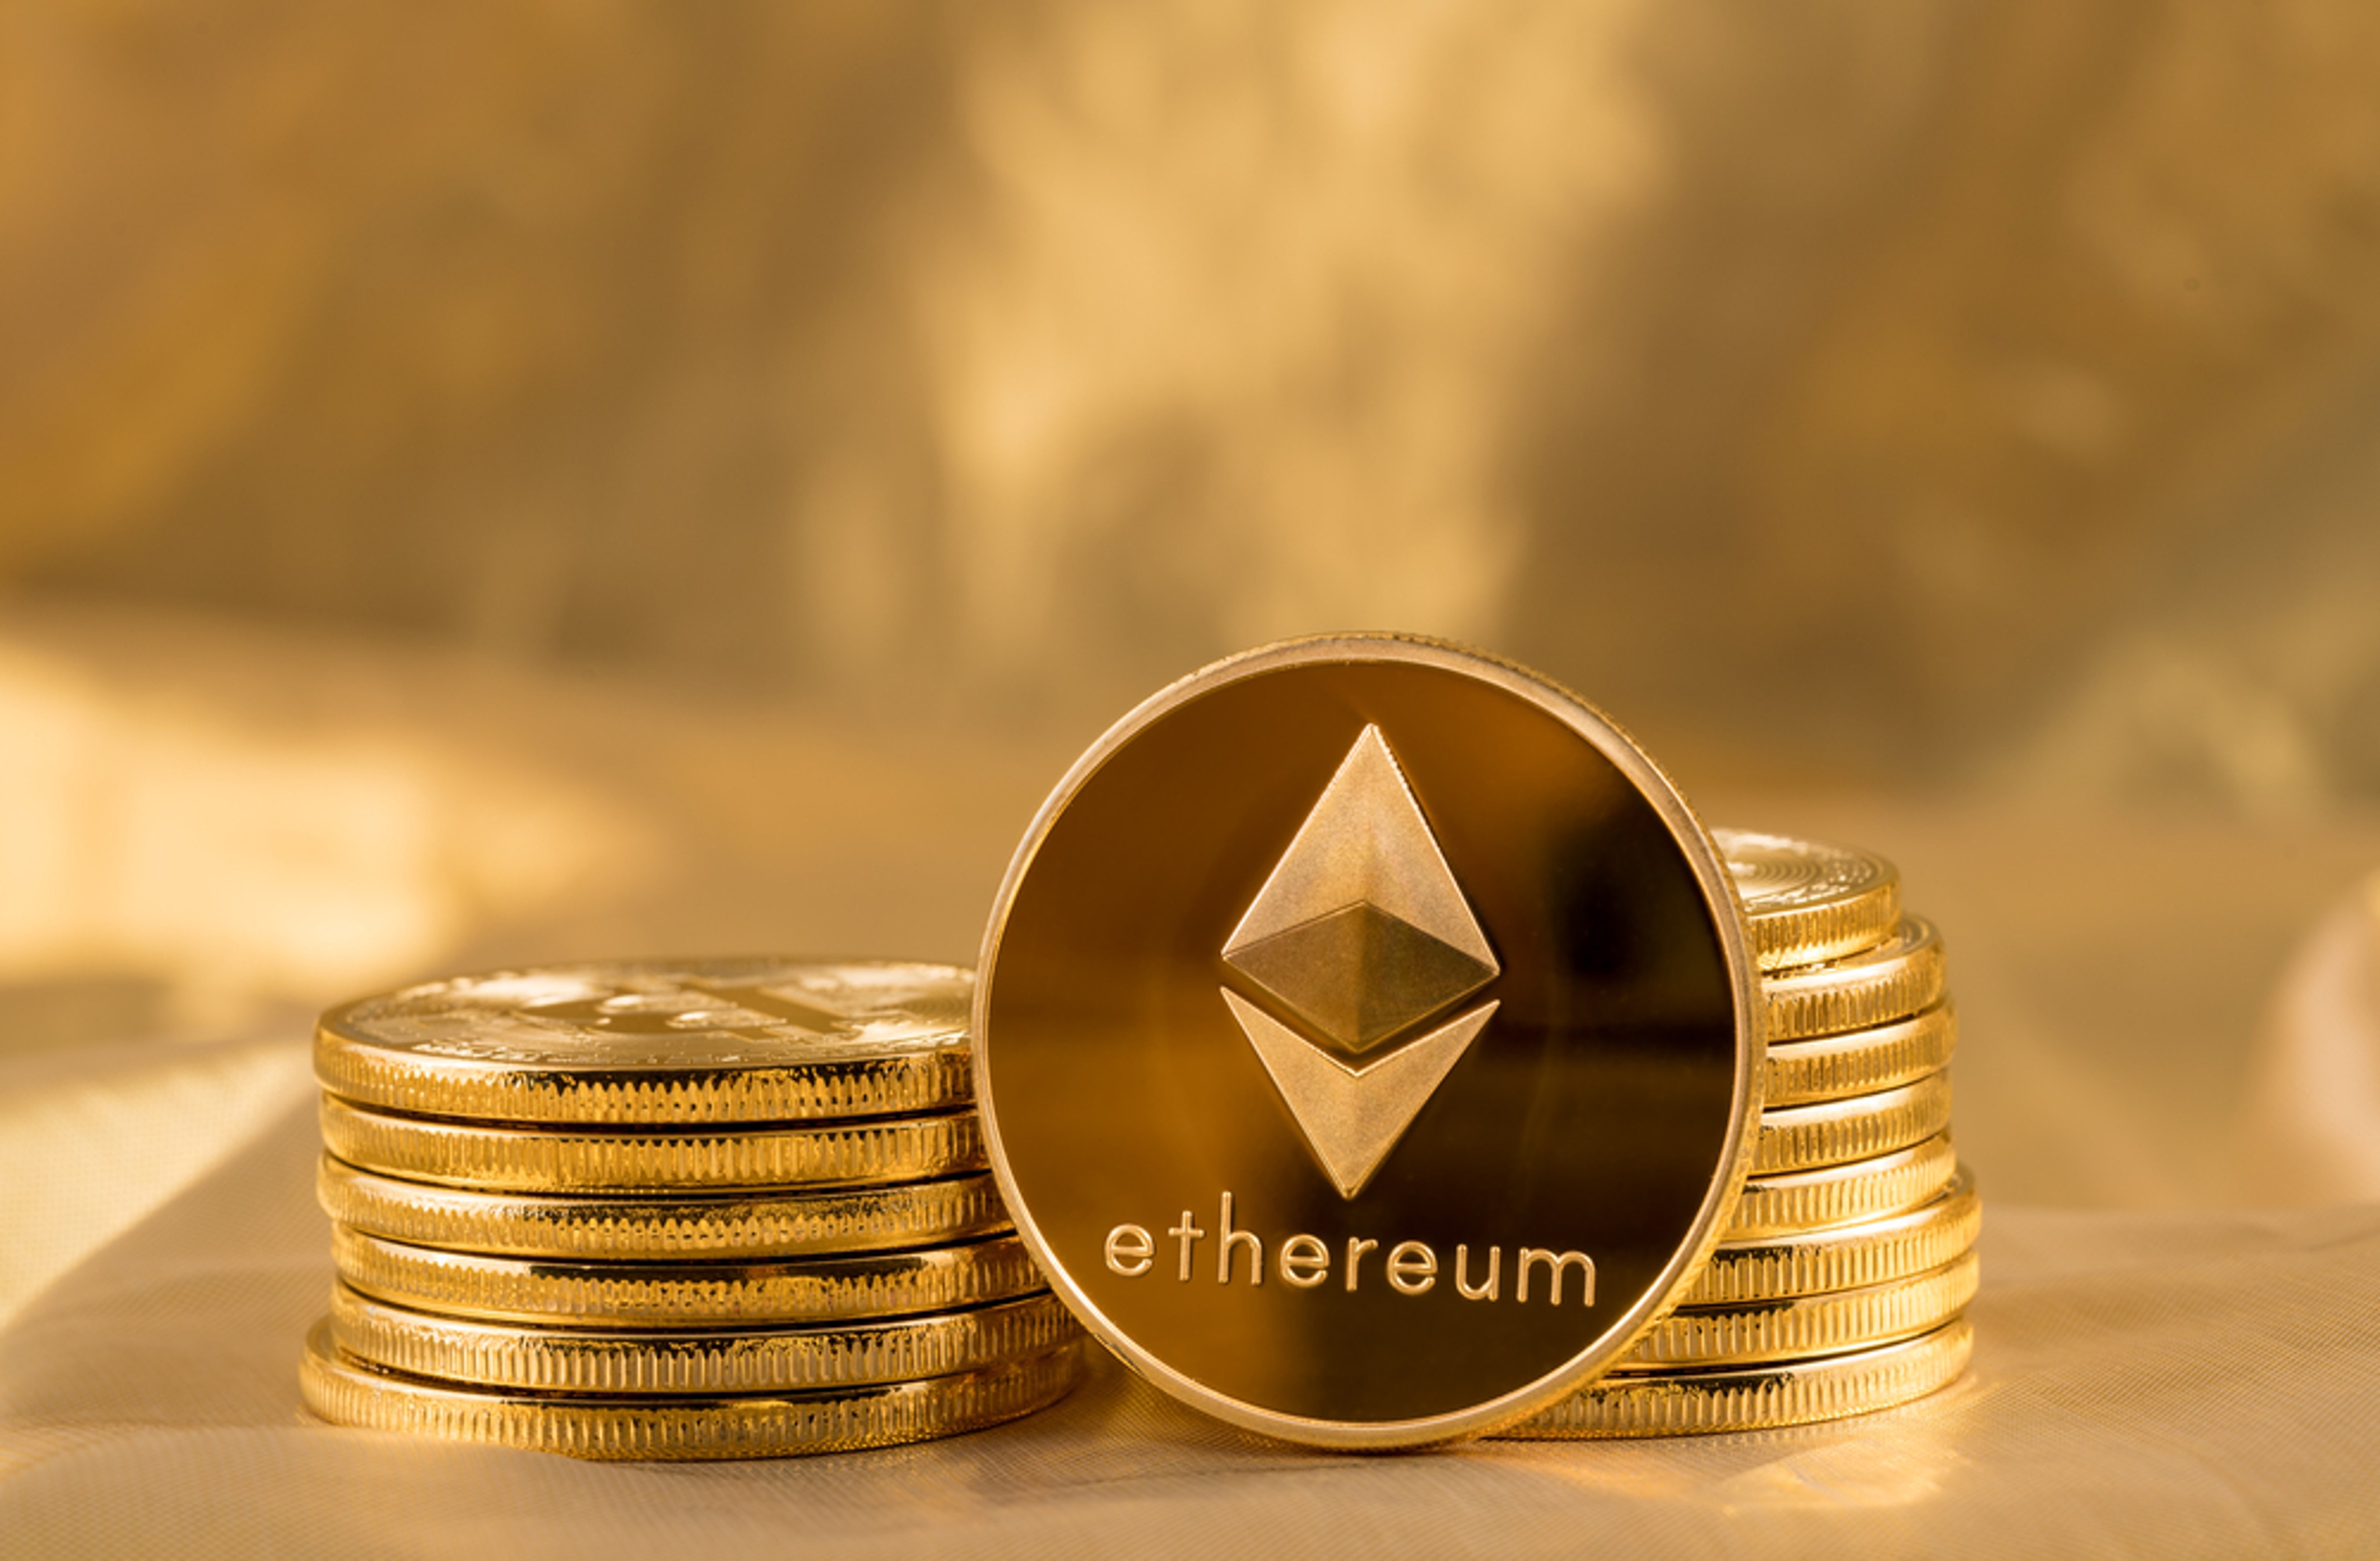 Stack,Of,Ether,Coins,Or,Ethereum,On,Gold,Background,To